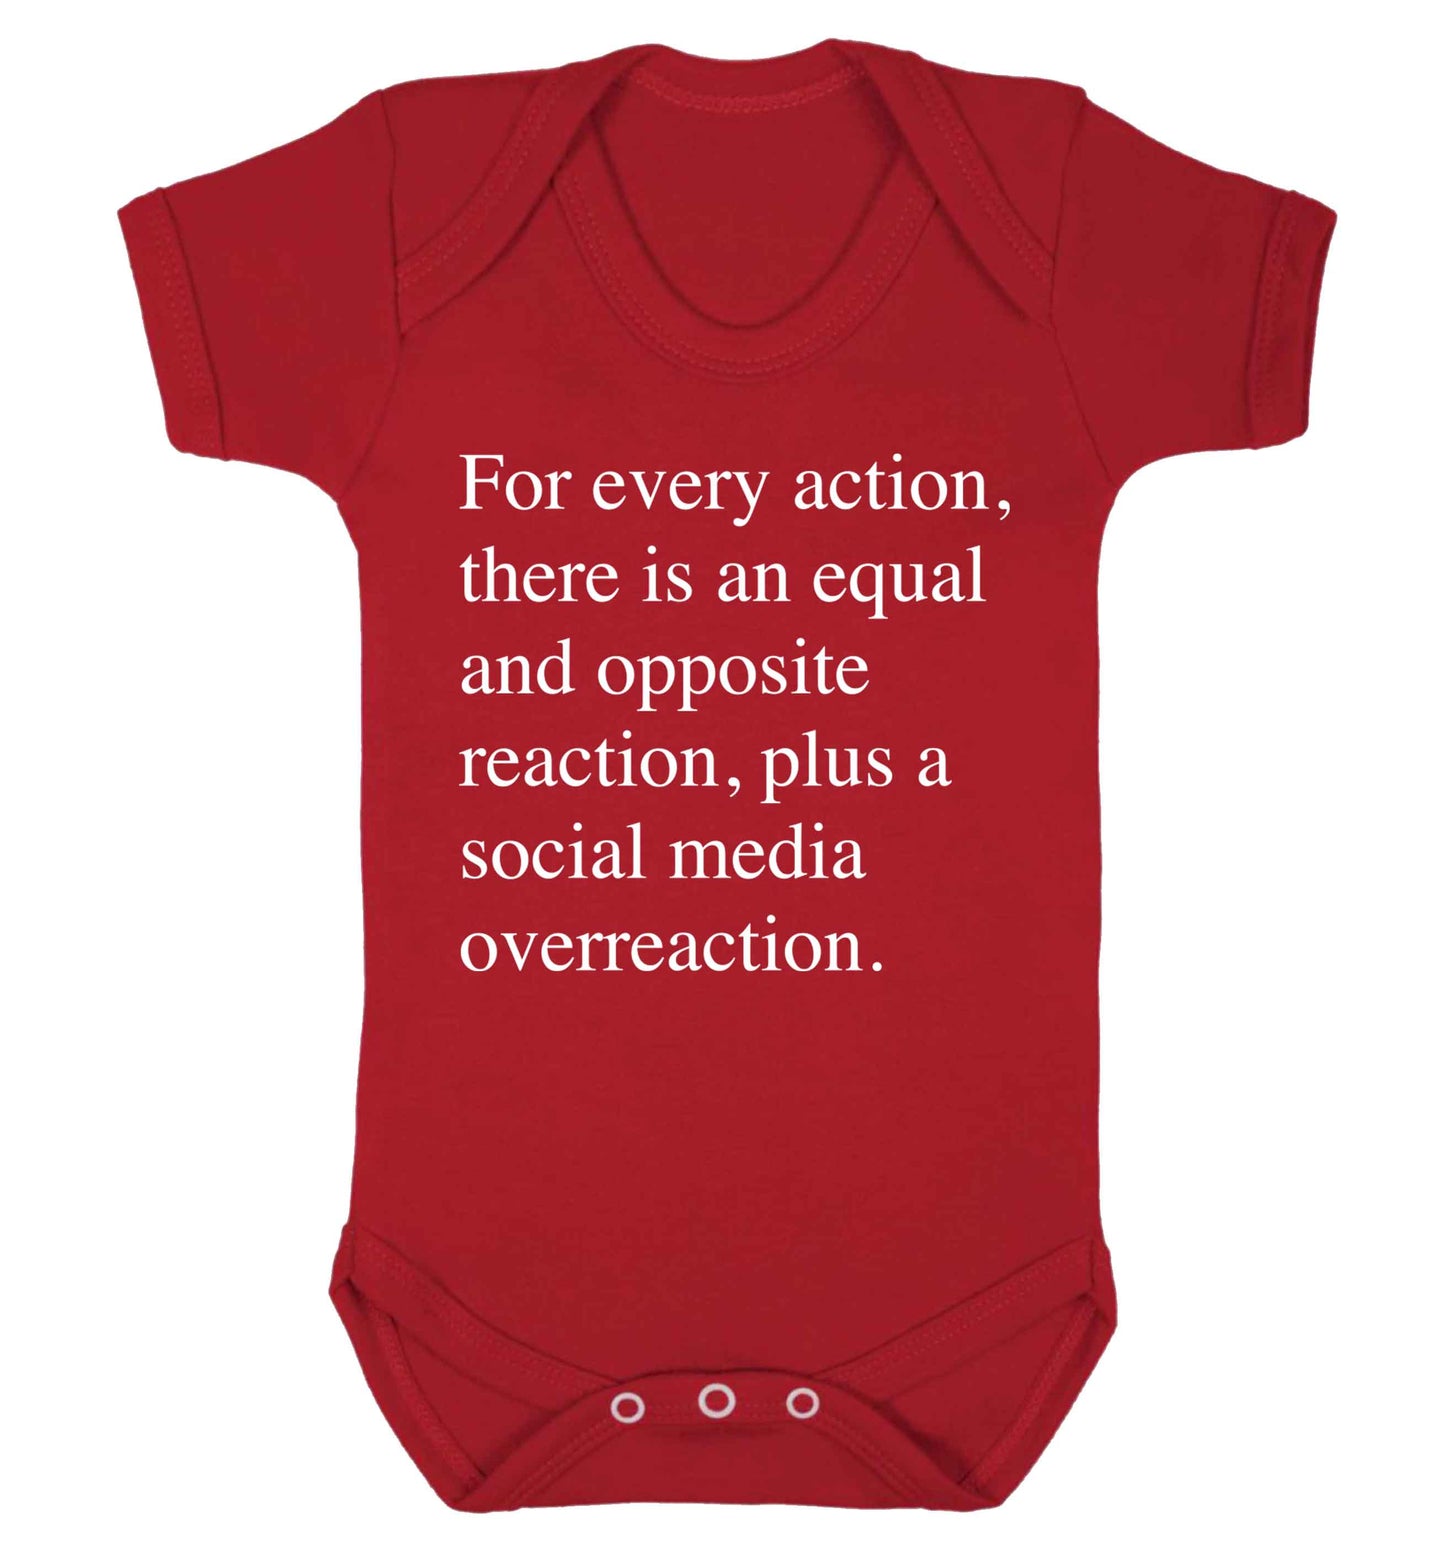 For every action...social media overreaction Baby Vest red 18-24 months